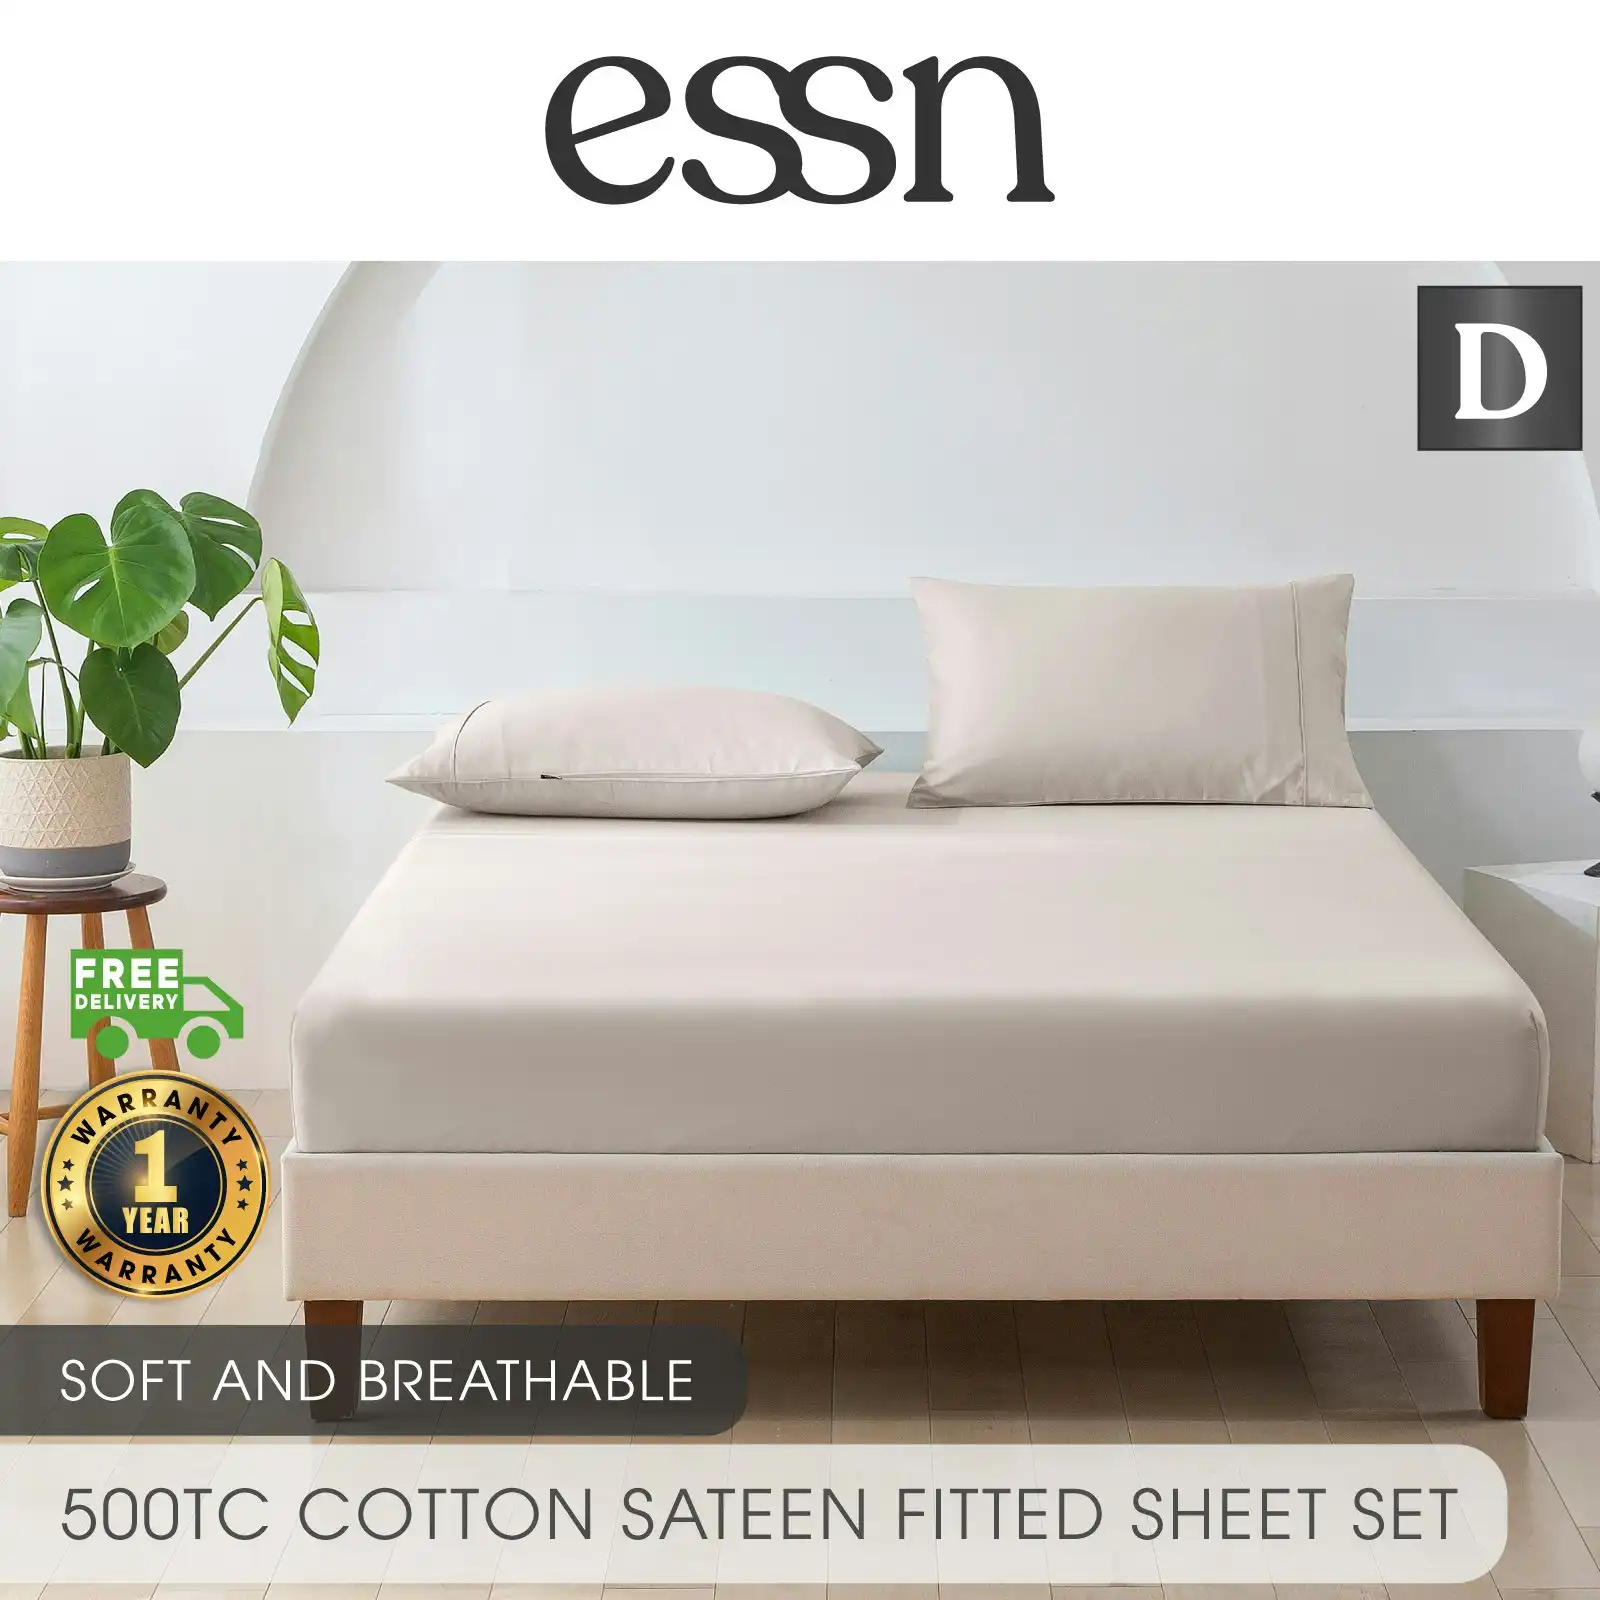 ESSN 500TC Cotton Sateen Fitted Sheet Set Stone  Double Bed